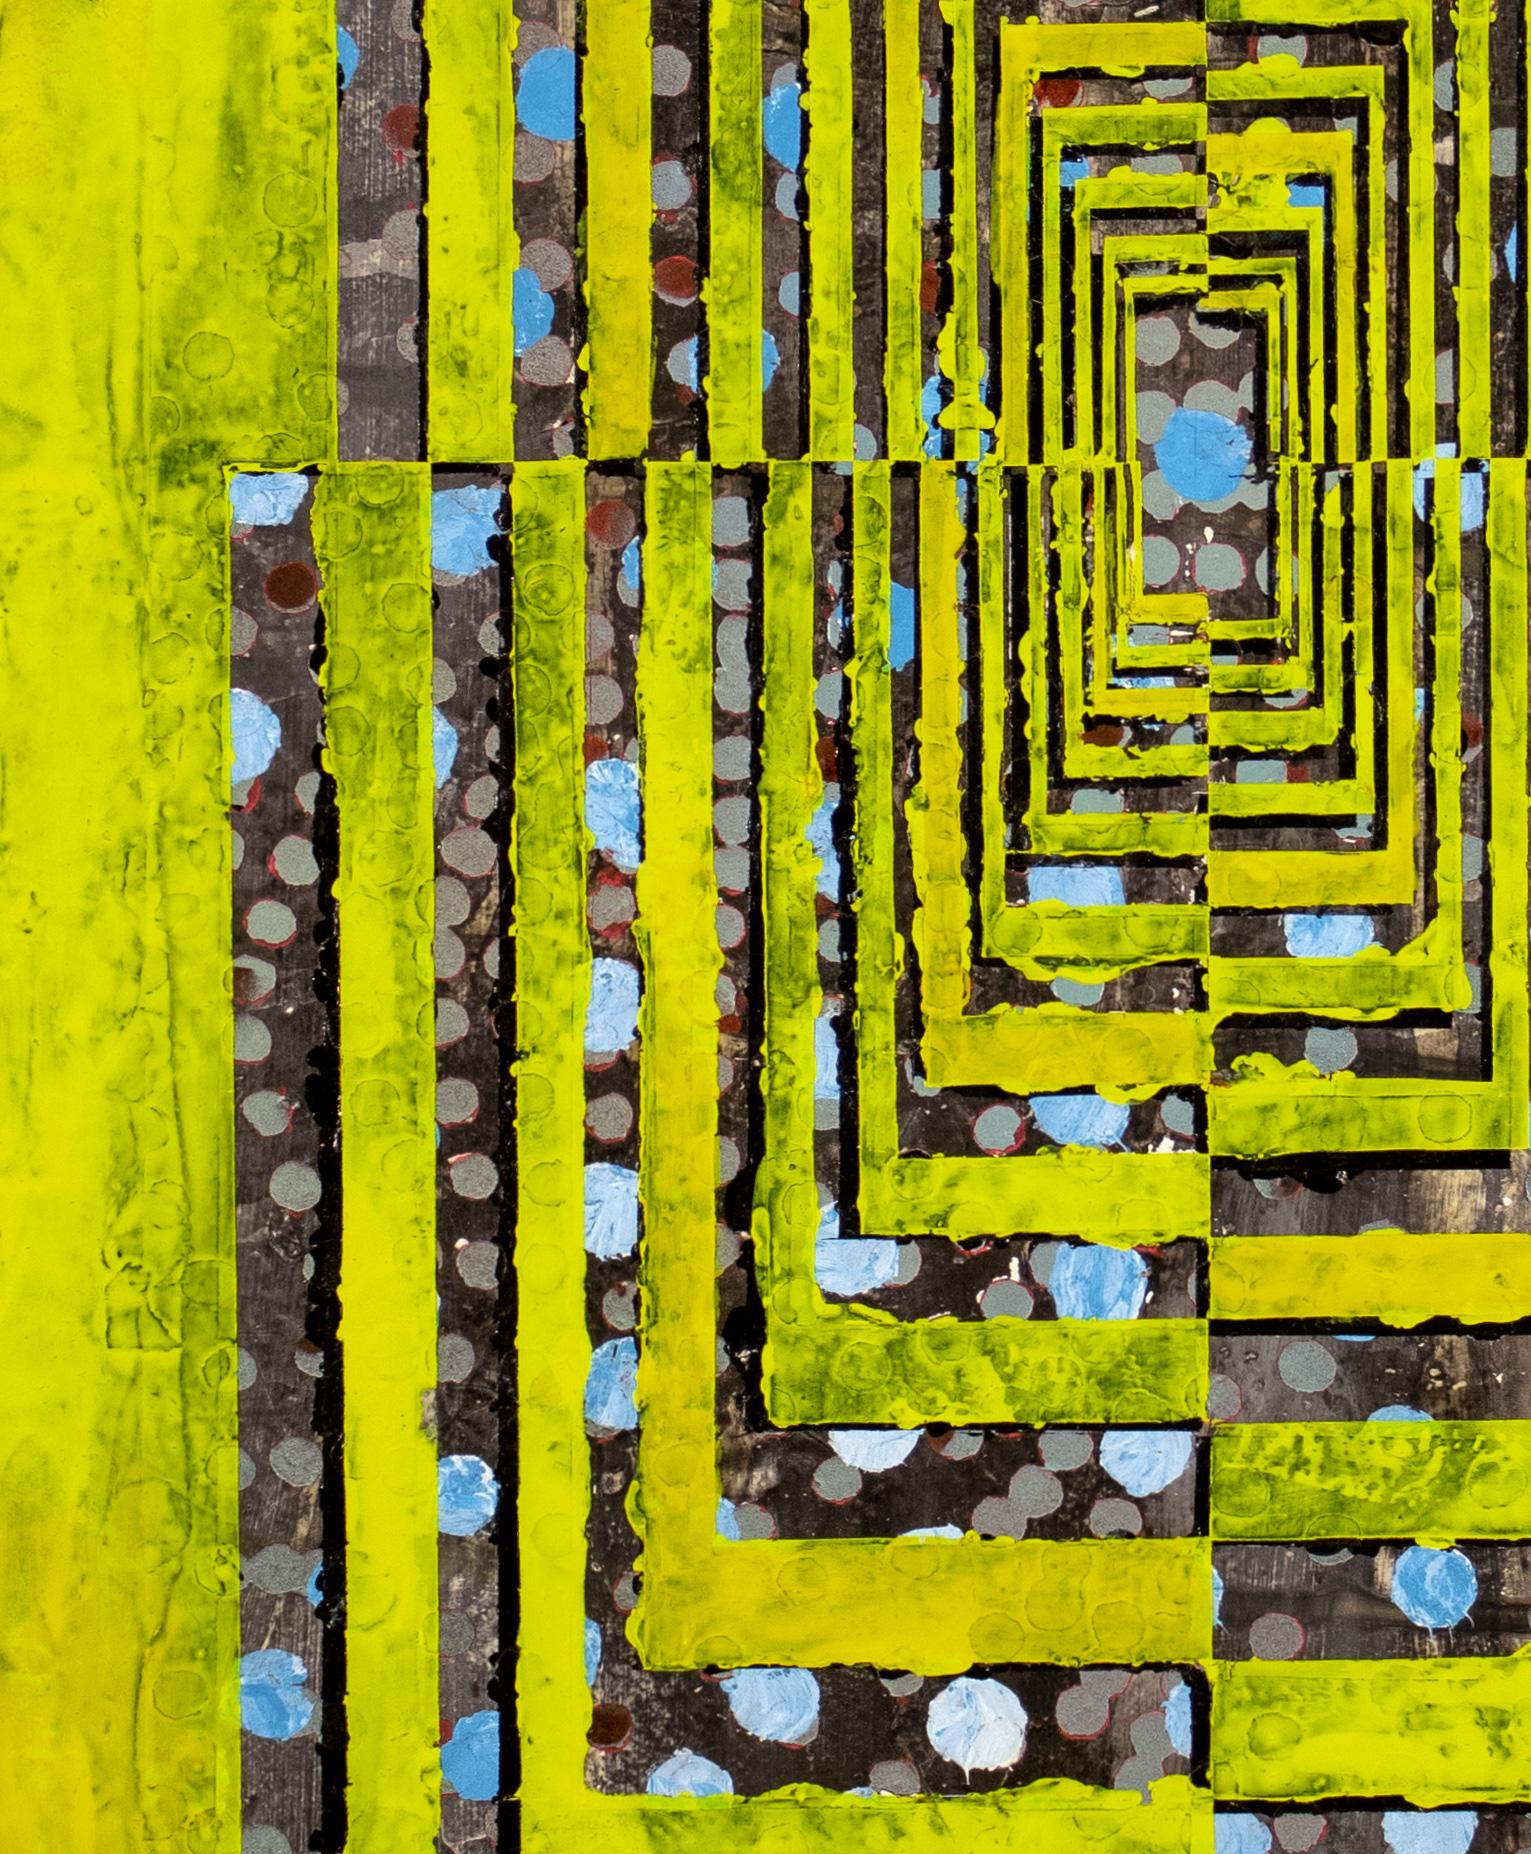 Excavator (portal 62) - Abstract Geometric Painting by Peter Hildebrand